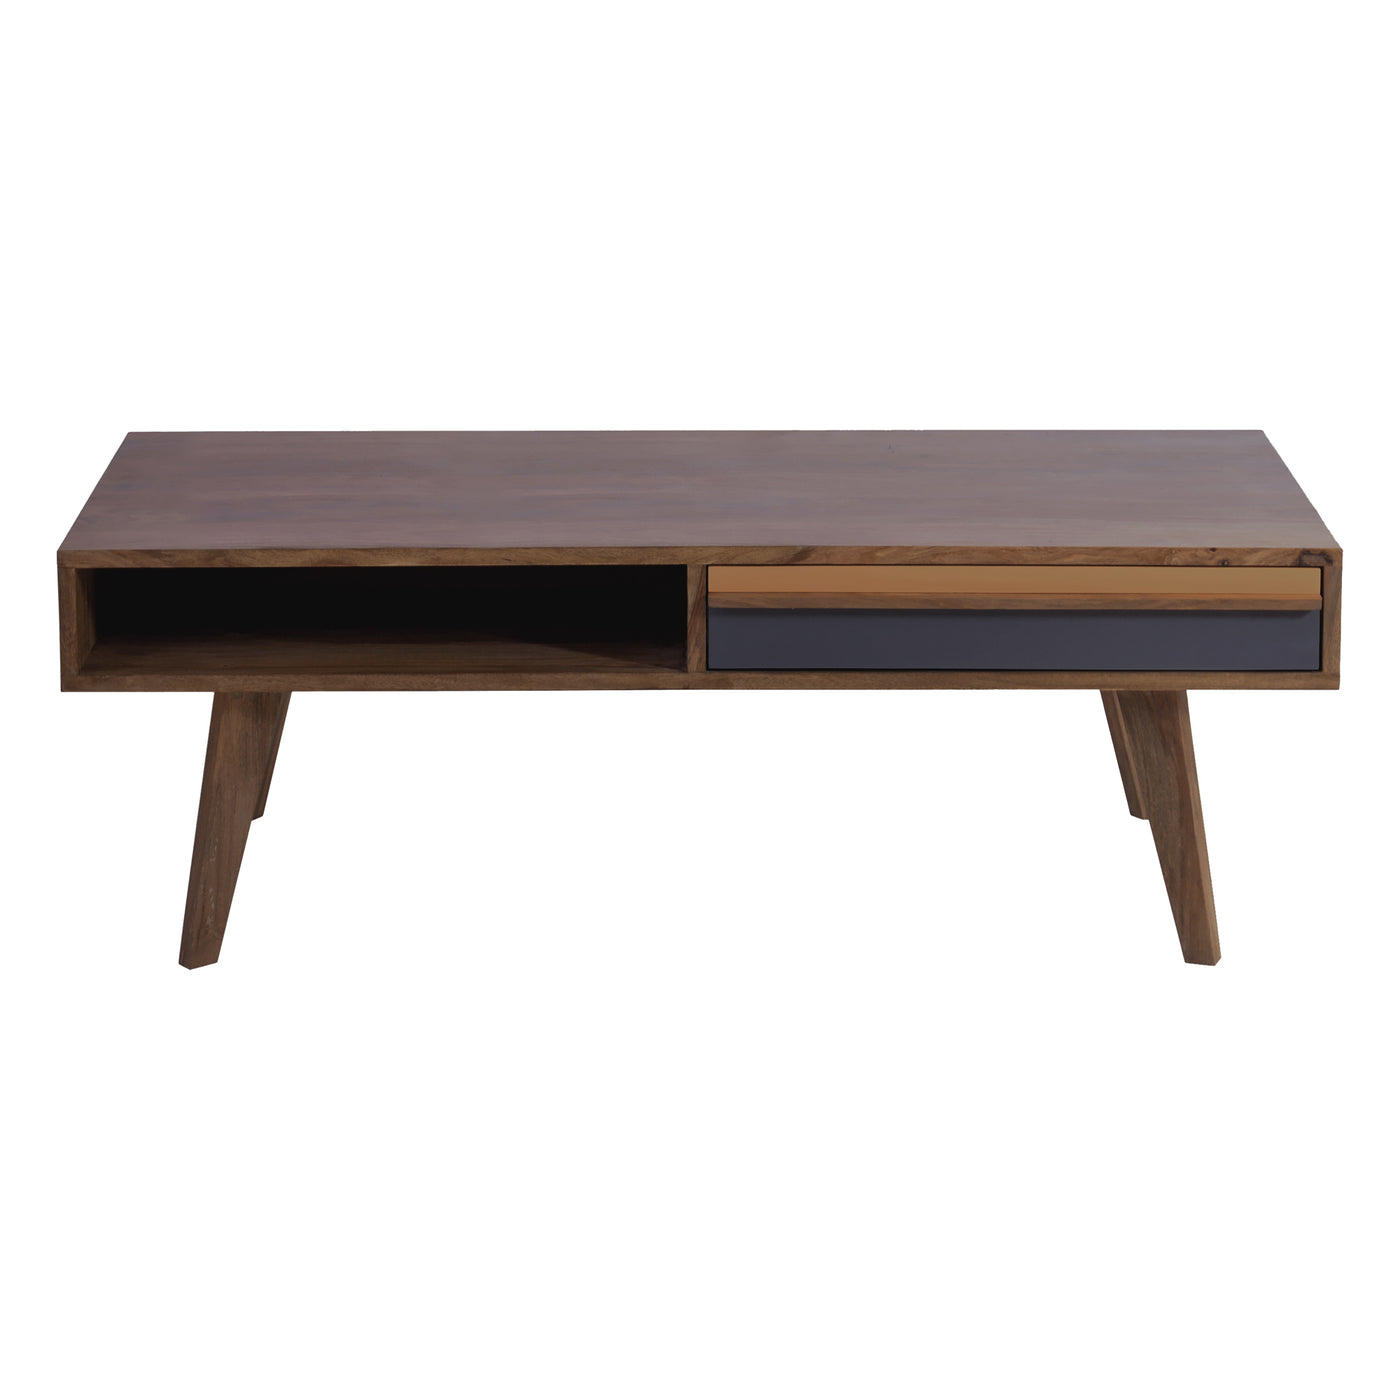 The Bliss Coffee Table's solid Sheesham wood displays unique markings that serve to be an artistic addition to your living...